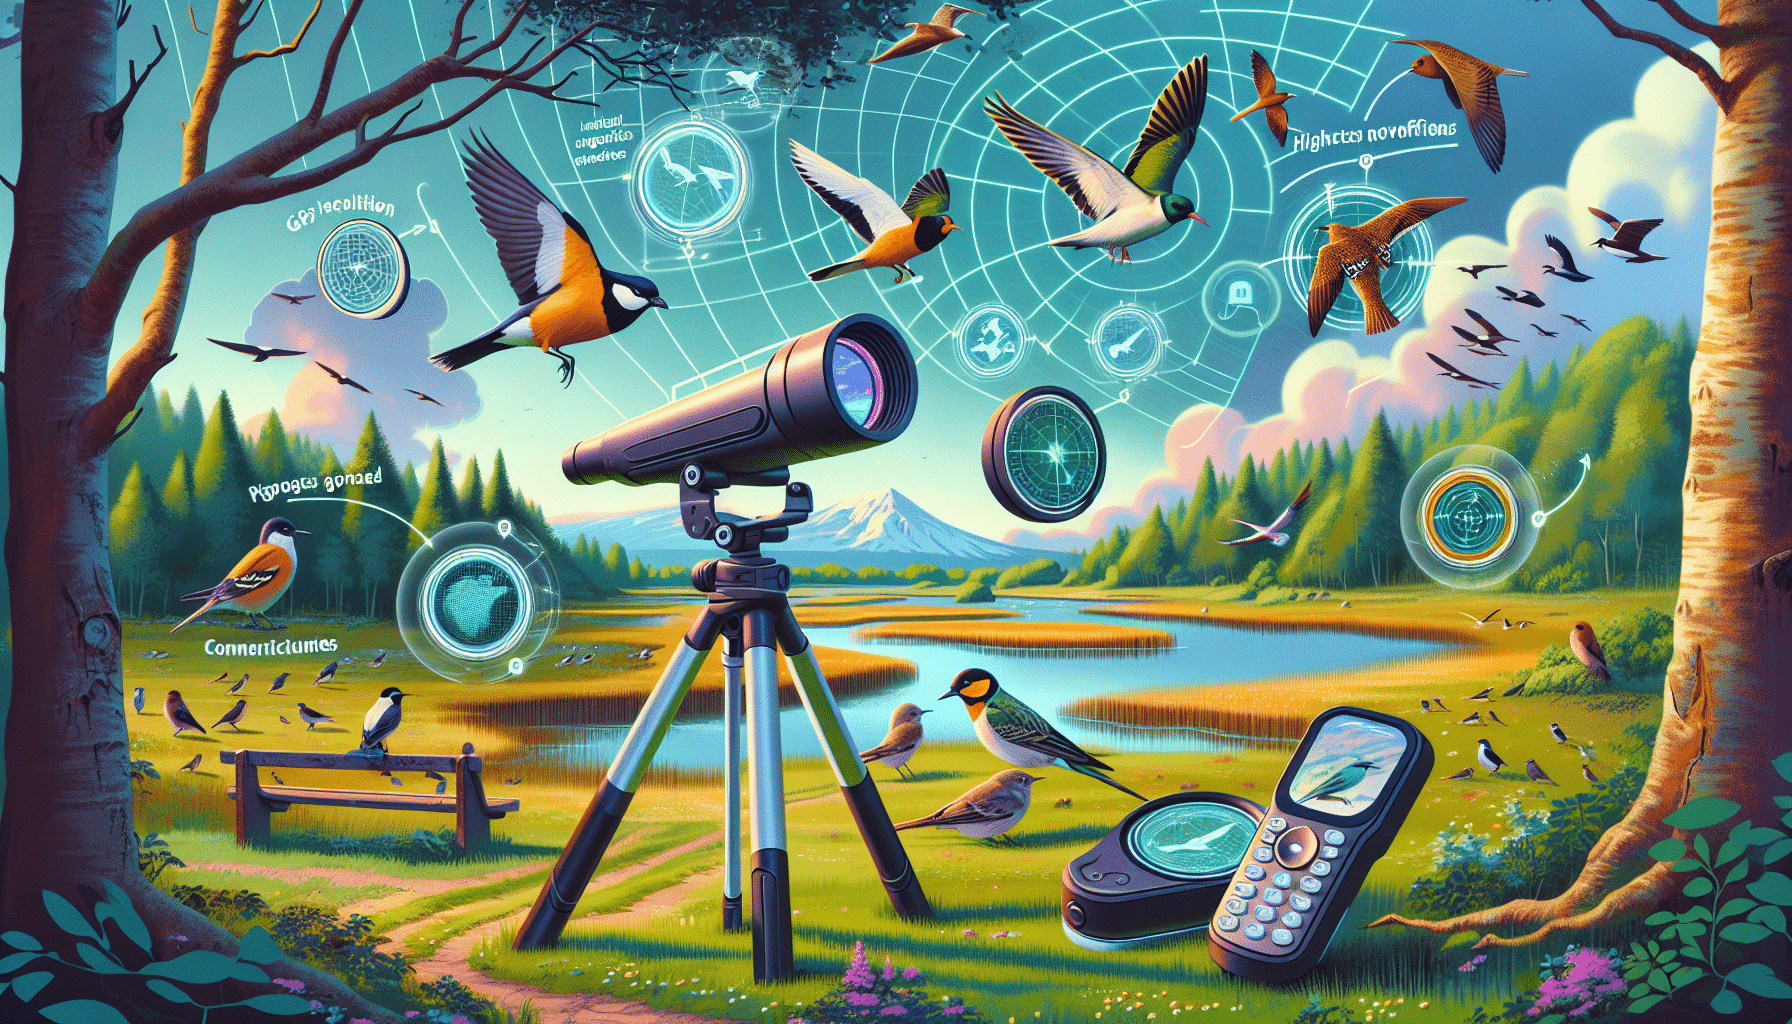 explore how these tech innovations could revolutionize the birdwatching experience and take it to new heights.